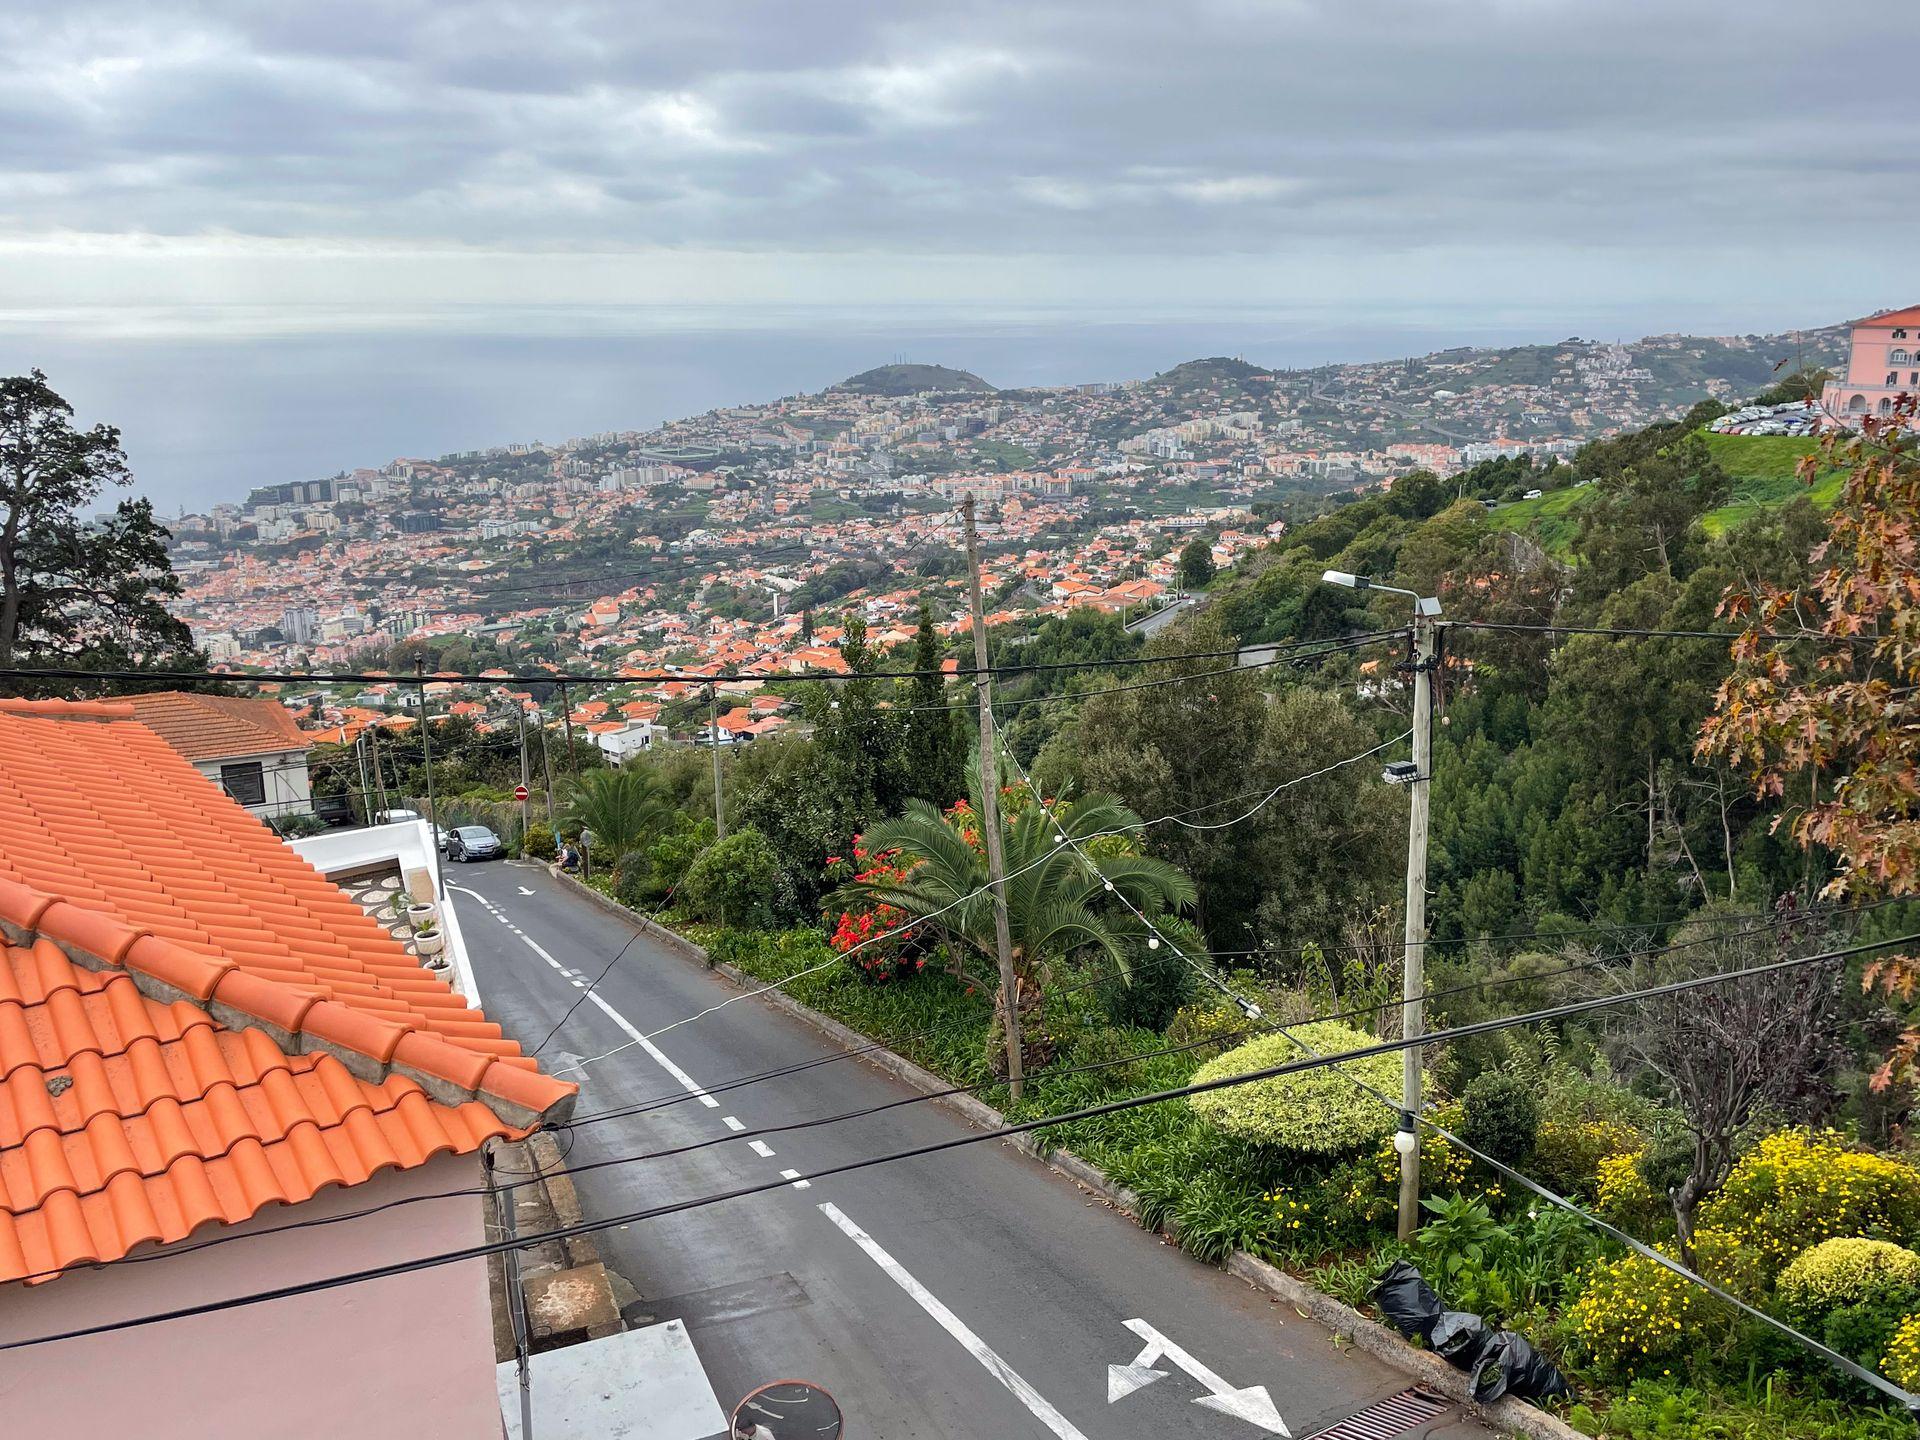 Looking down at the city of Funchal and the ocean from the Monte Palace Gardens.